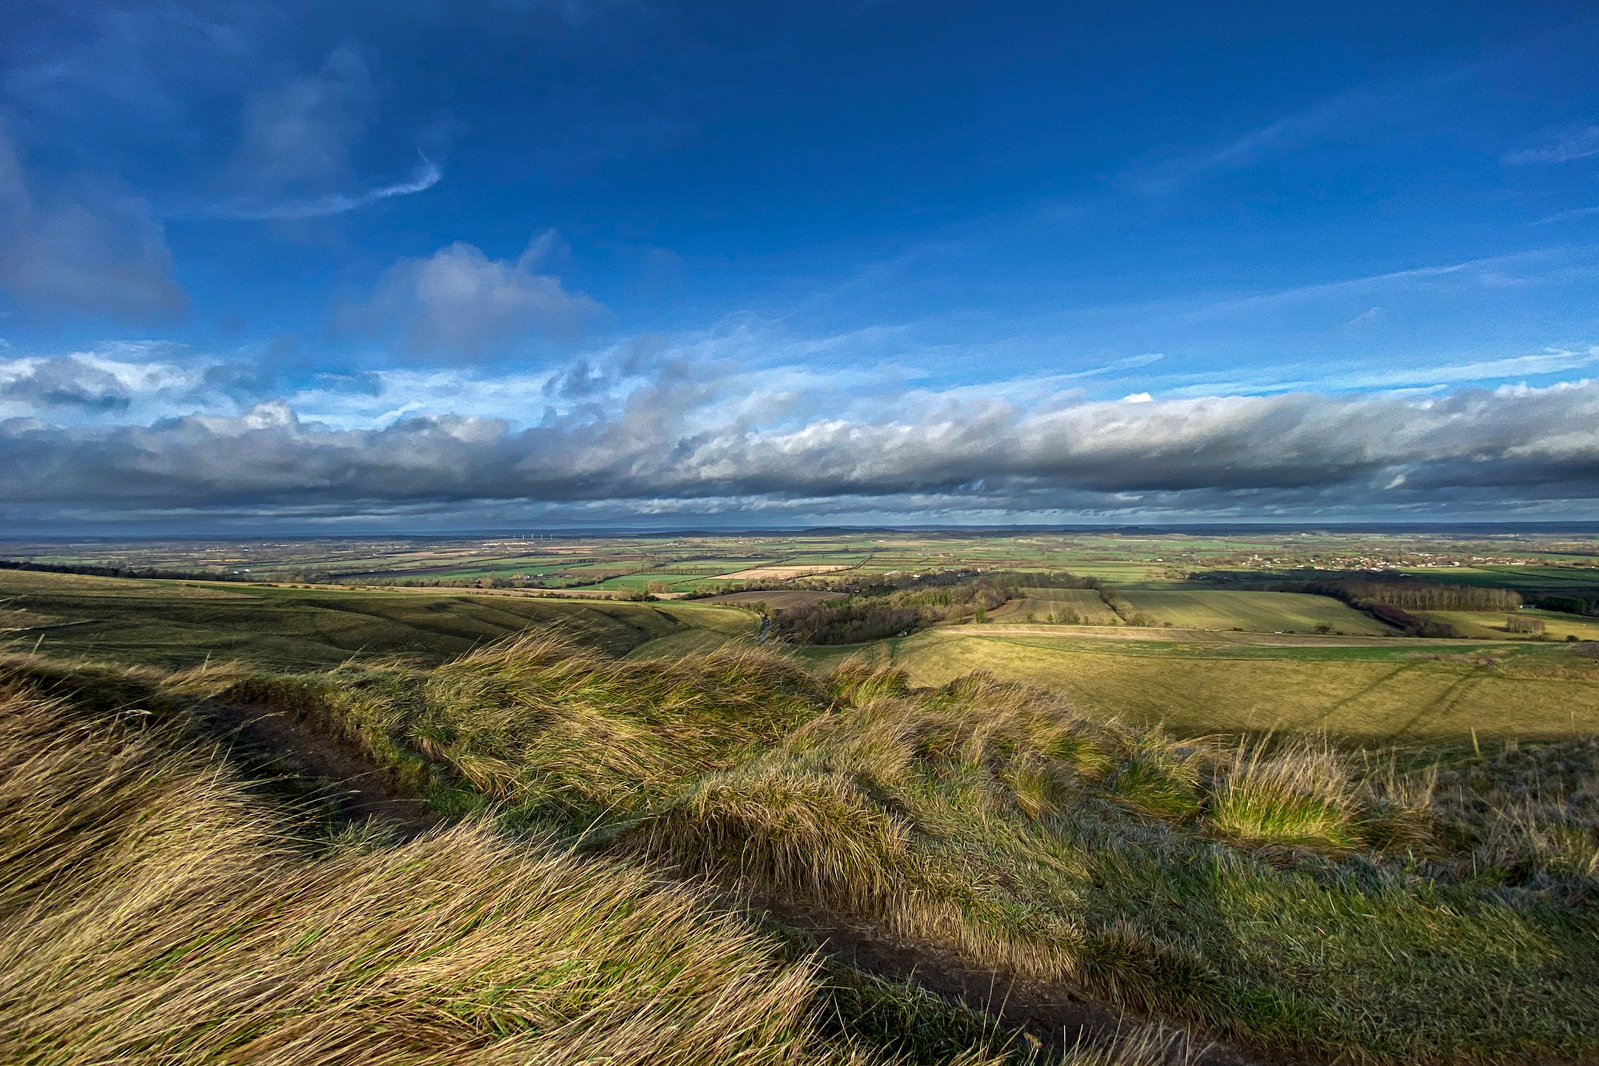 The view from the Uffington White Horse looking at Dragon Hill.